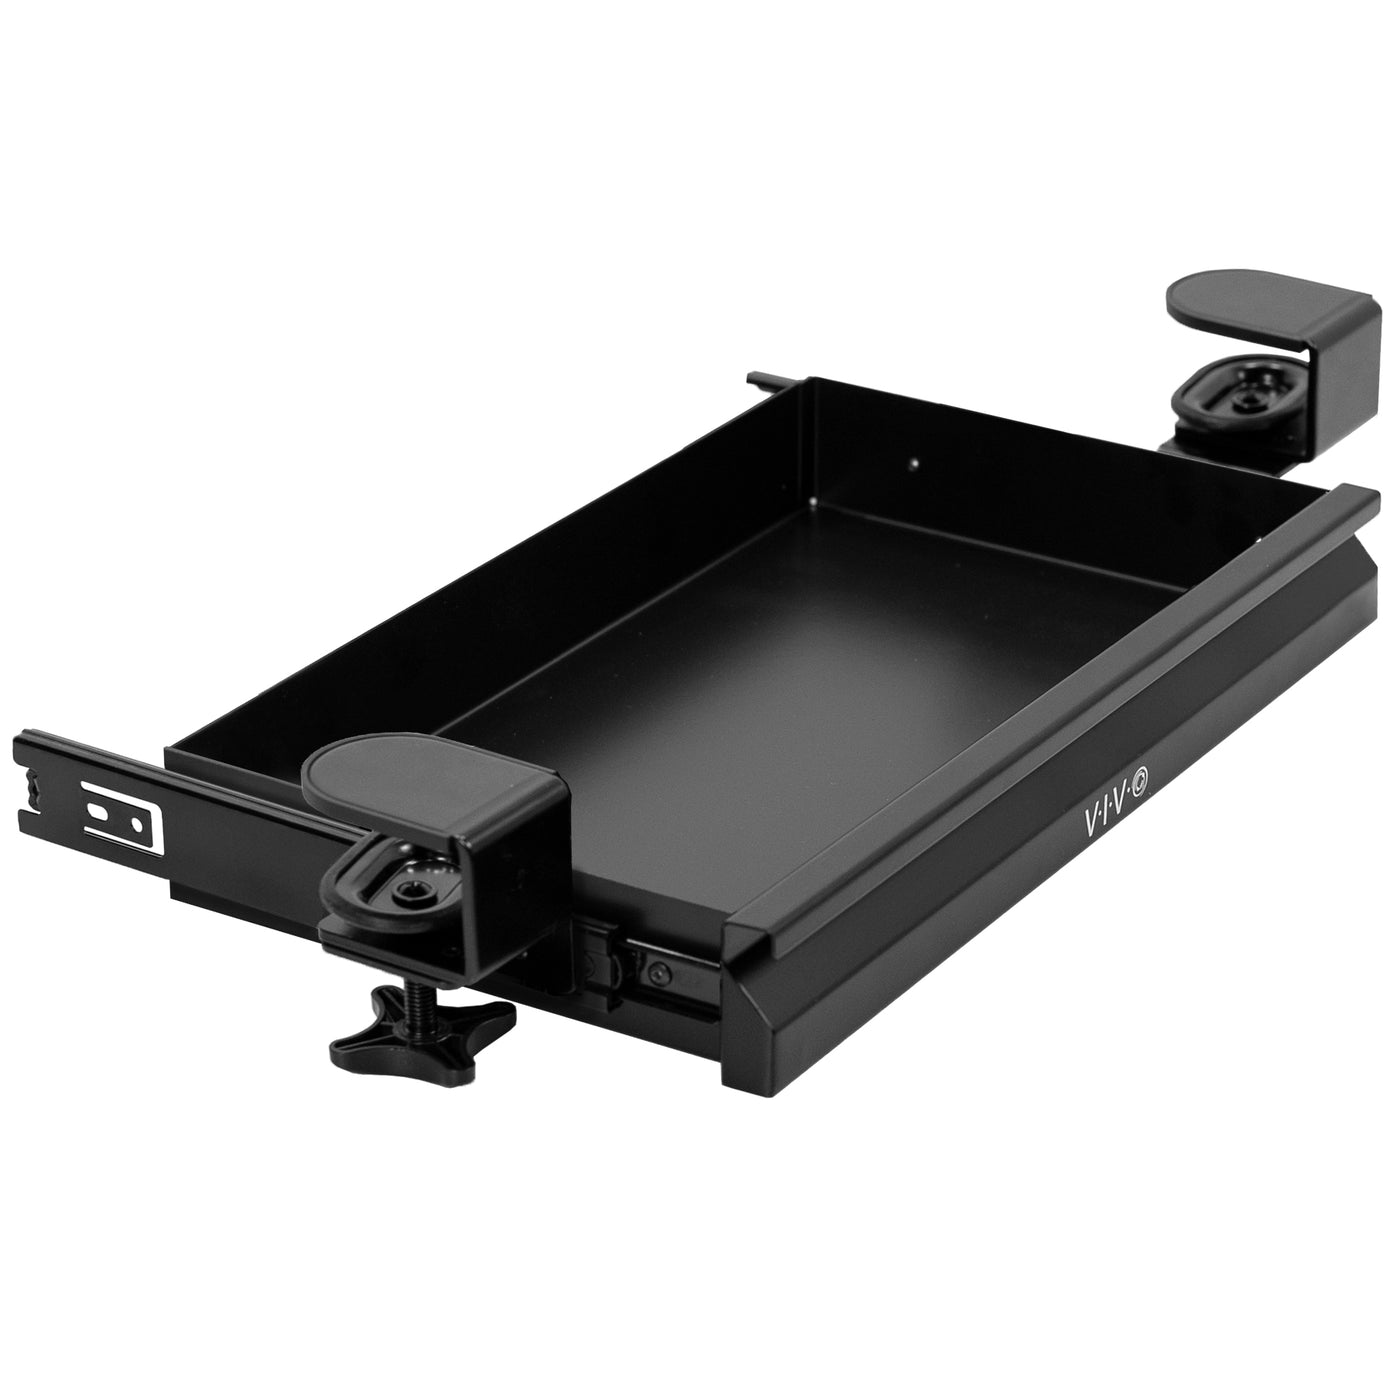 16 inch Clamp-on Sliding Pull-out Under Table Drawer for Office Desk, Shallow Storage Organizer for Sit Stand Workstation